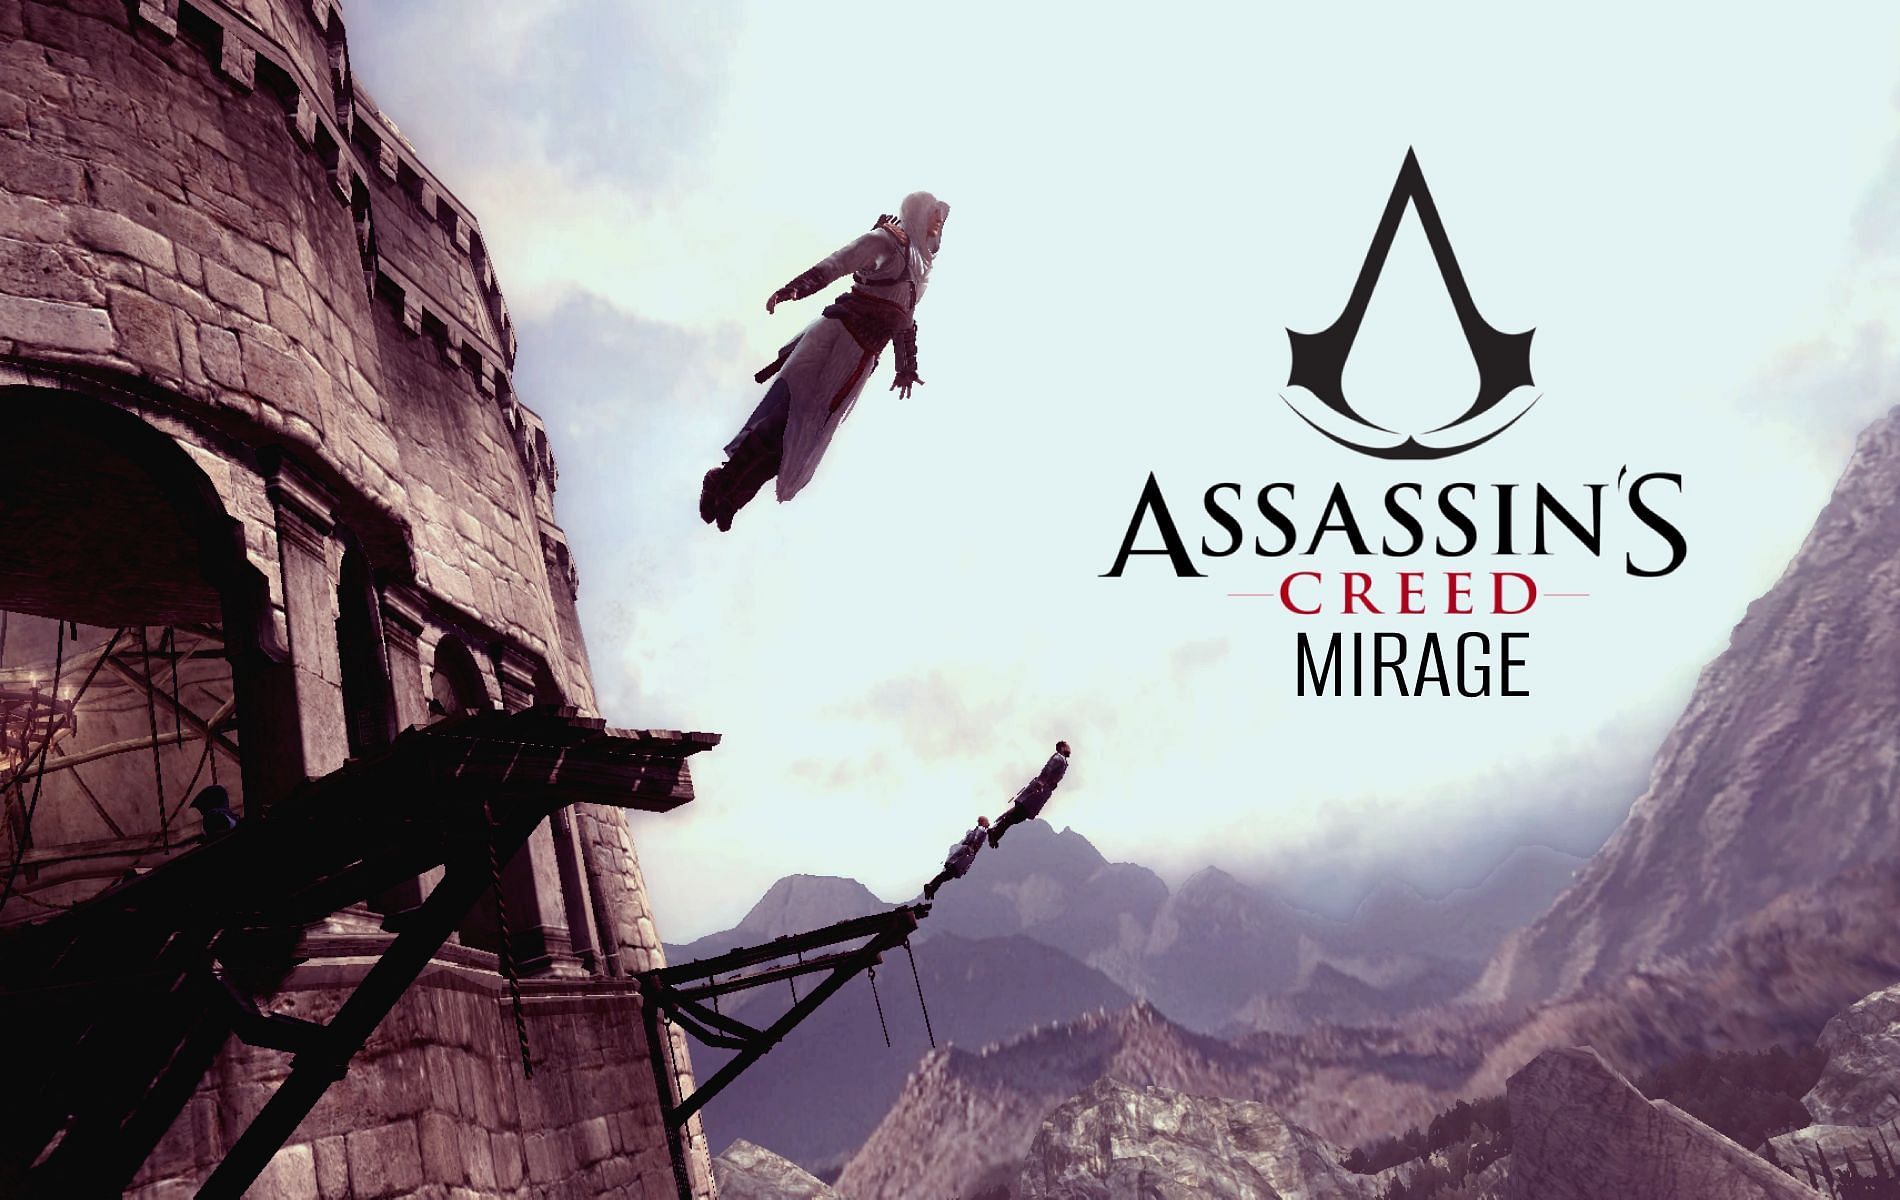 Assassin's Creed Black Flag new-gen remake reportedly in early development